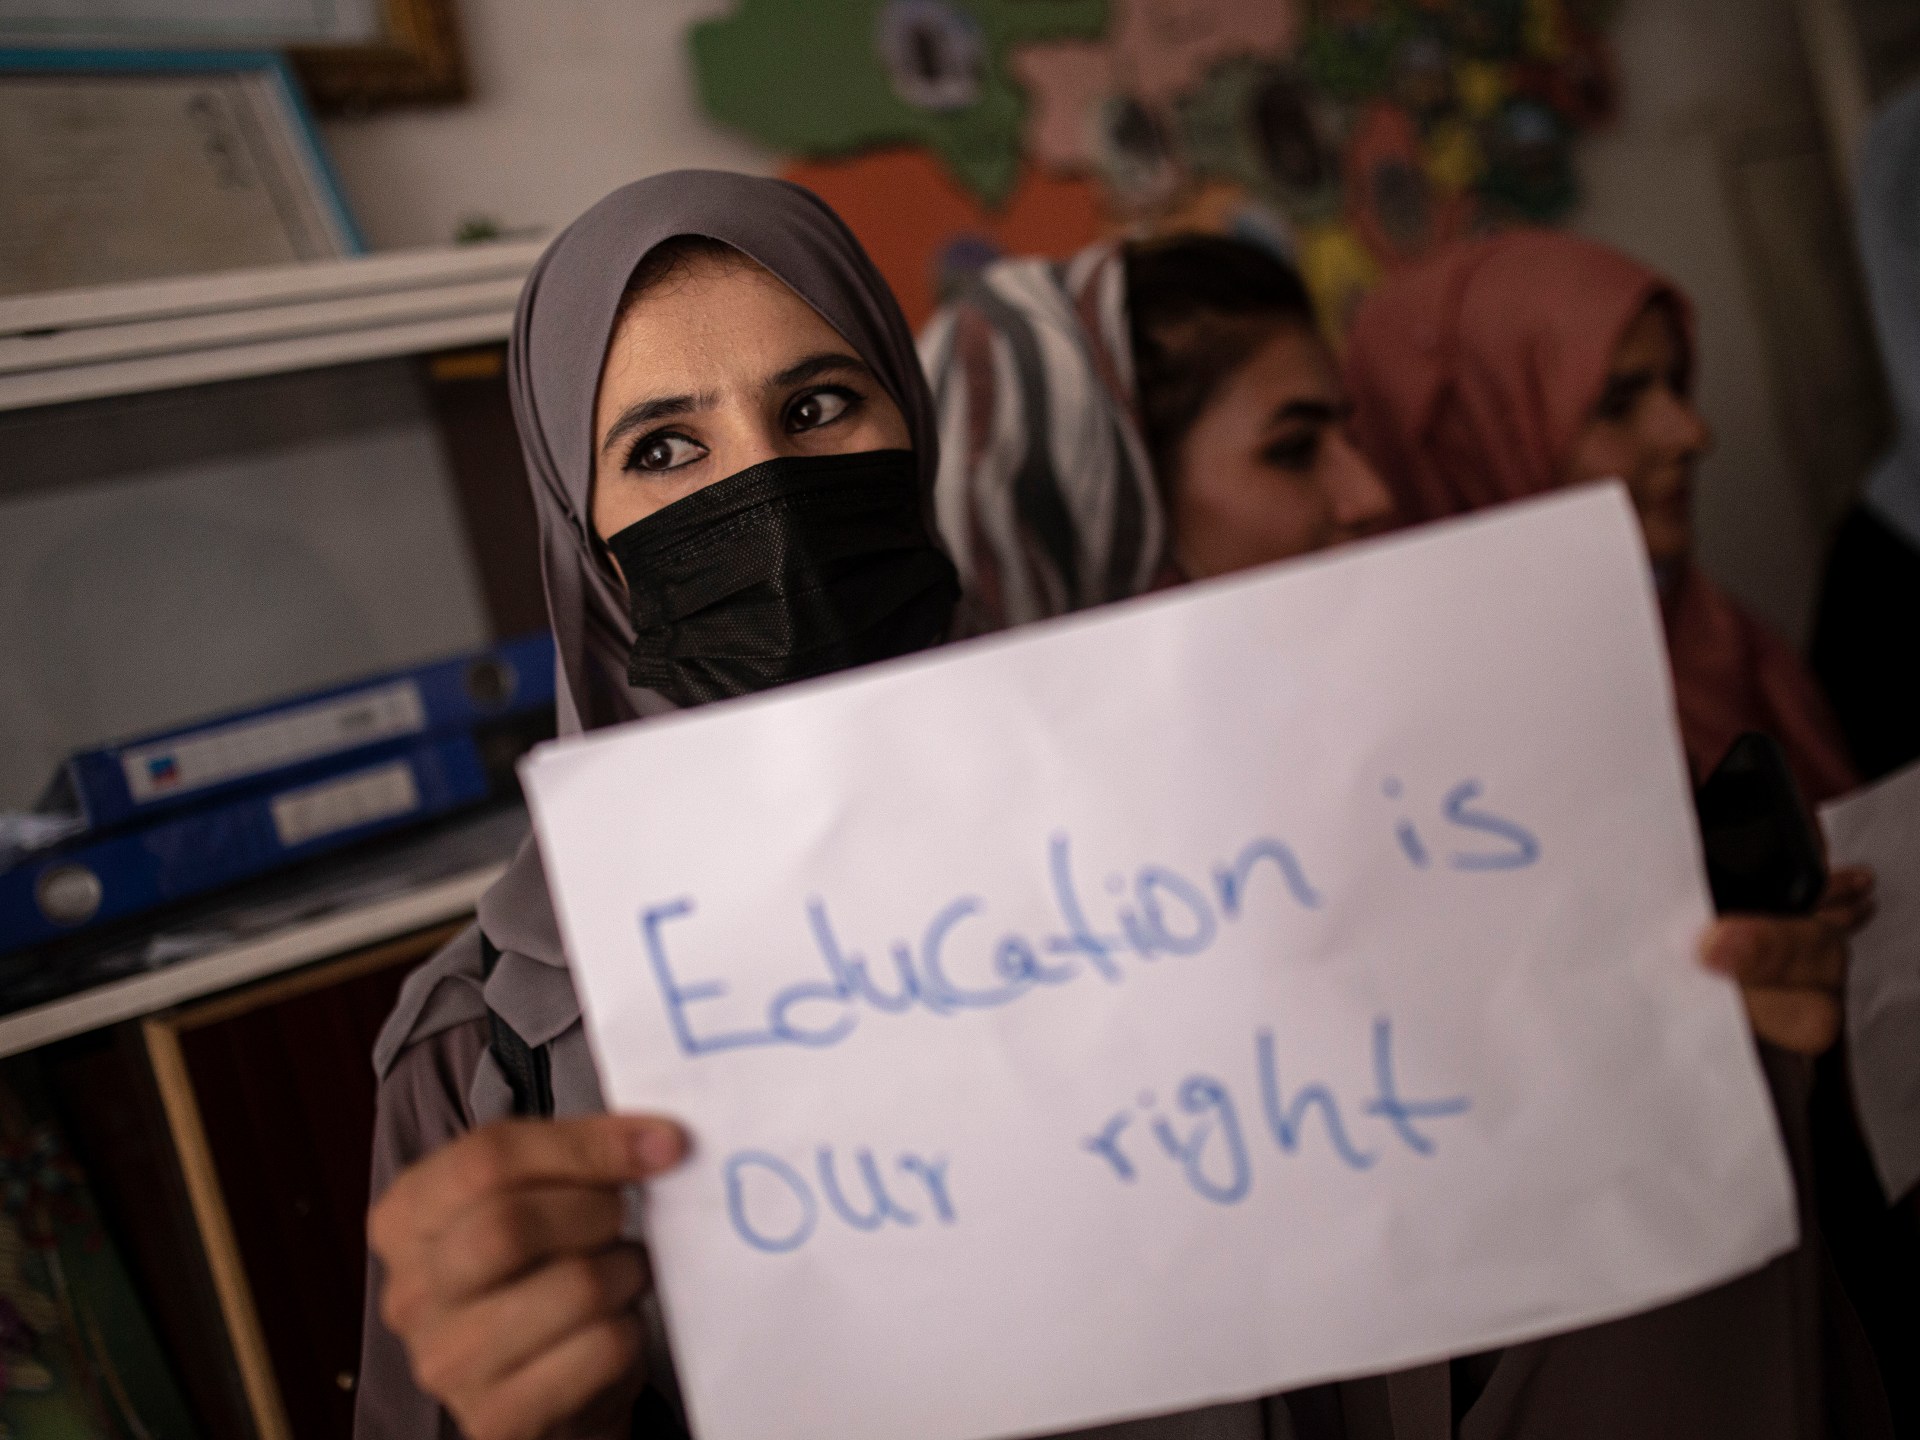 Taliban official calls for schools to be reopened for girls | Taliban News